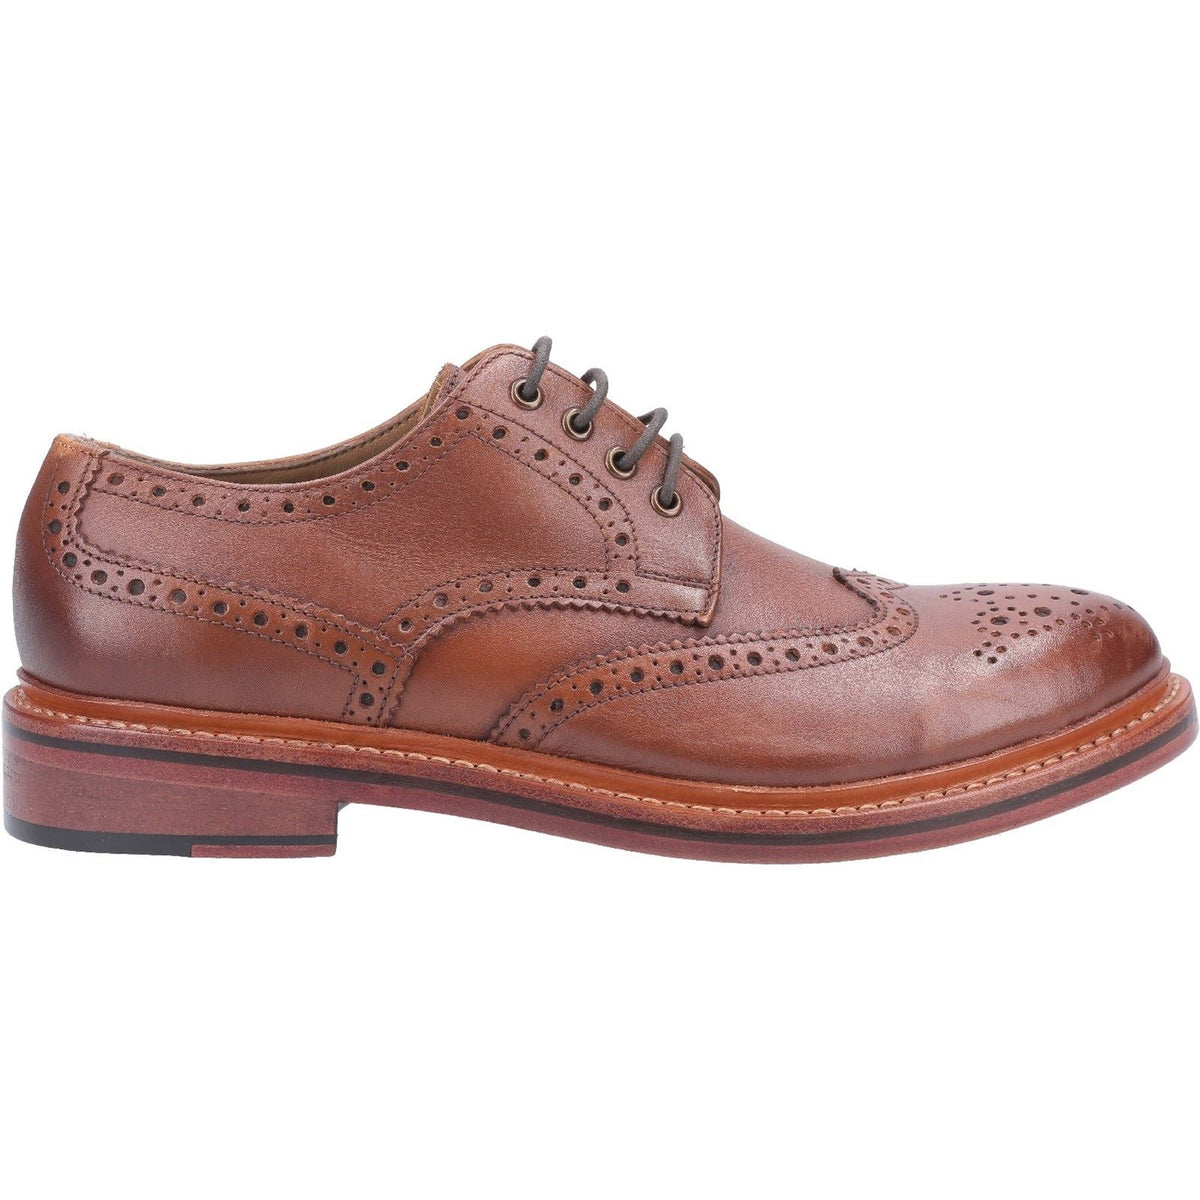 Cotswold Quenington Leather Goodyear Welted Shoes